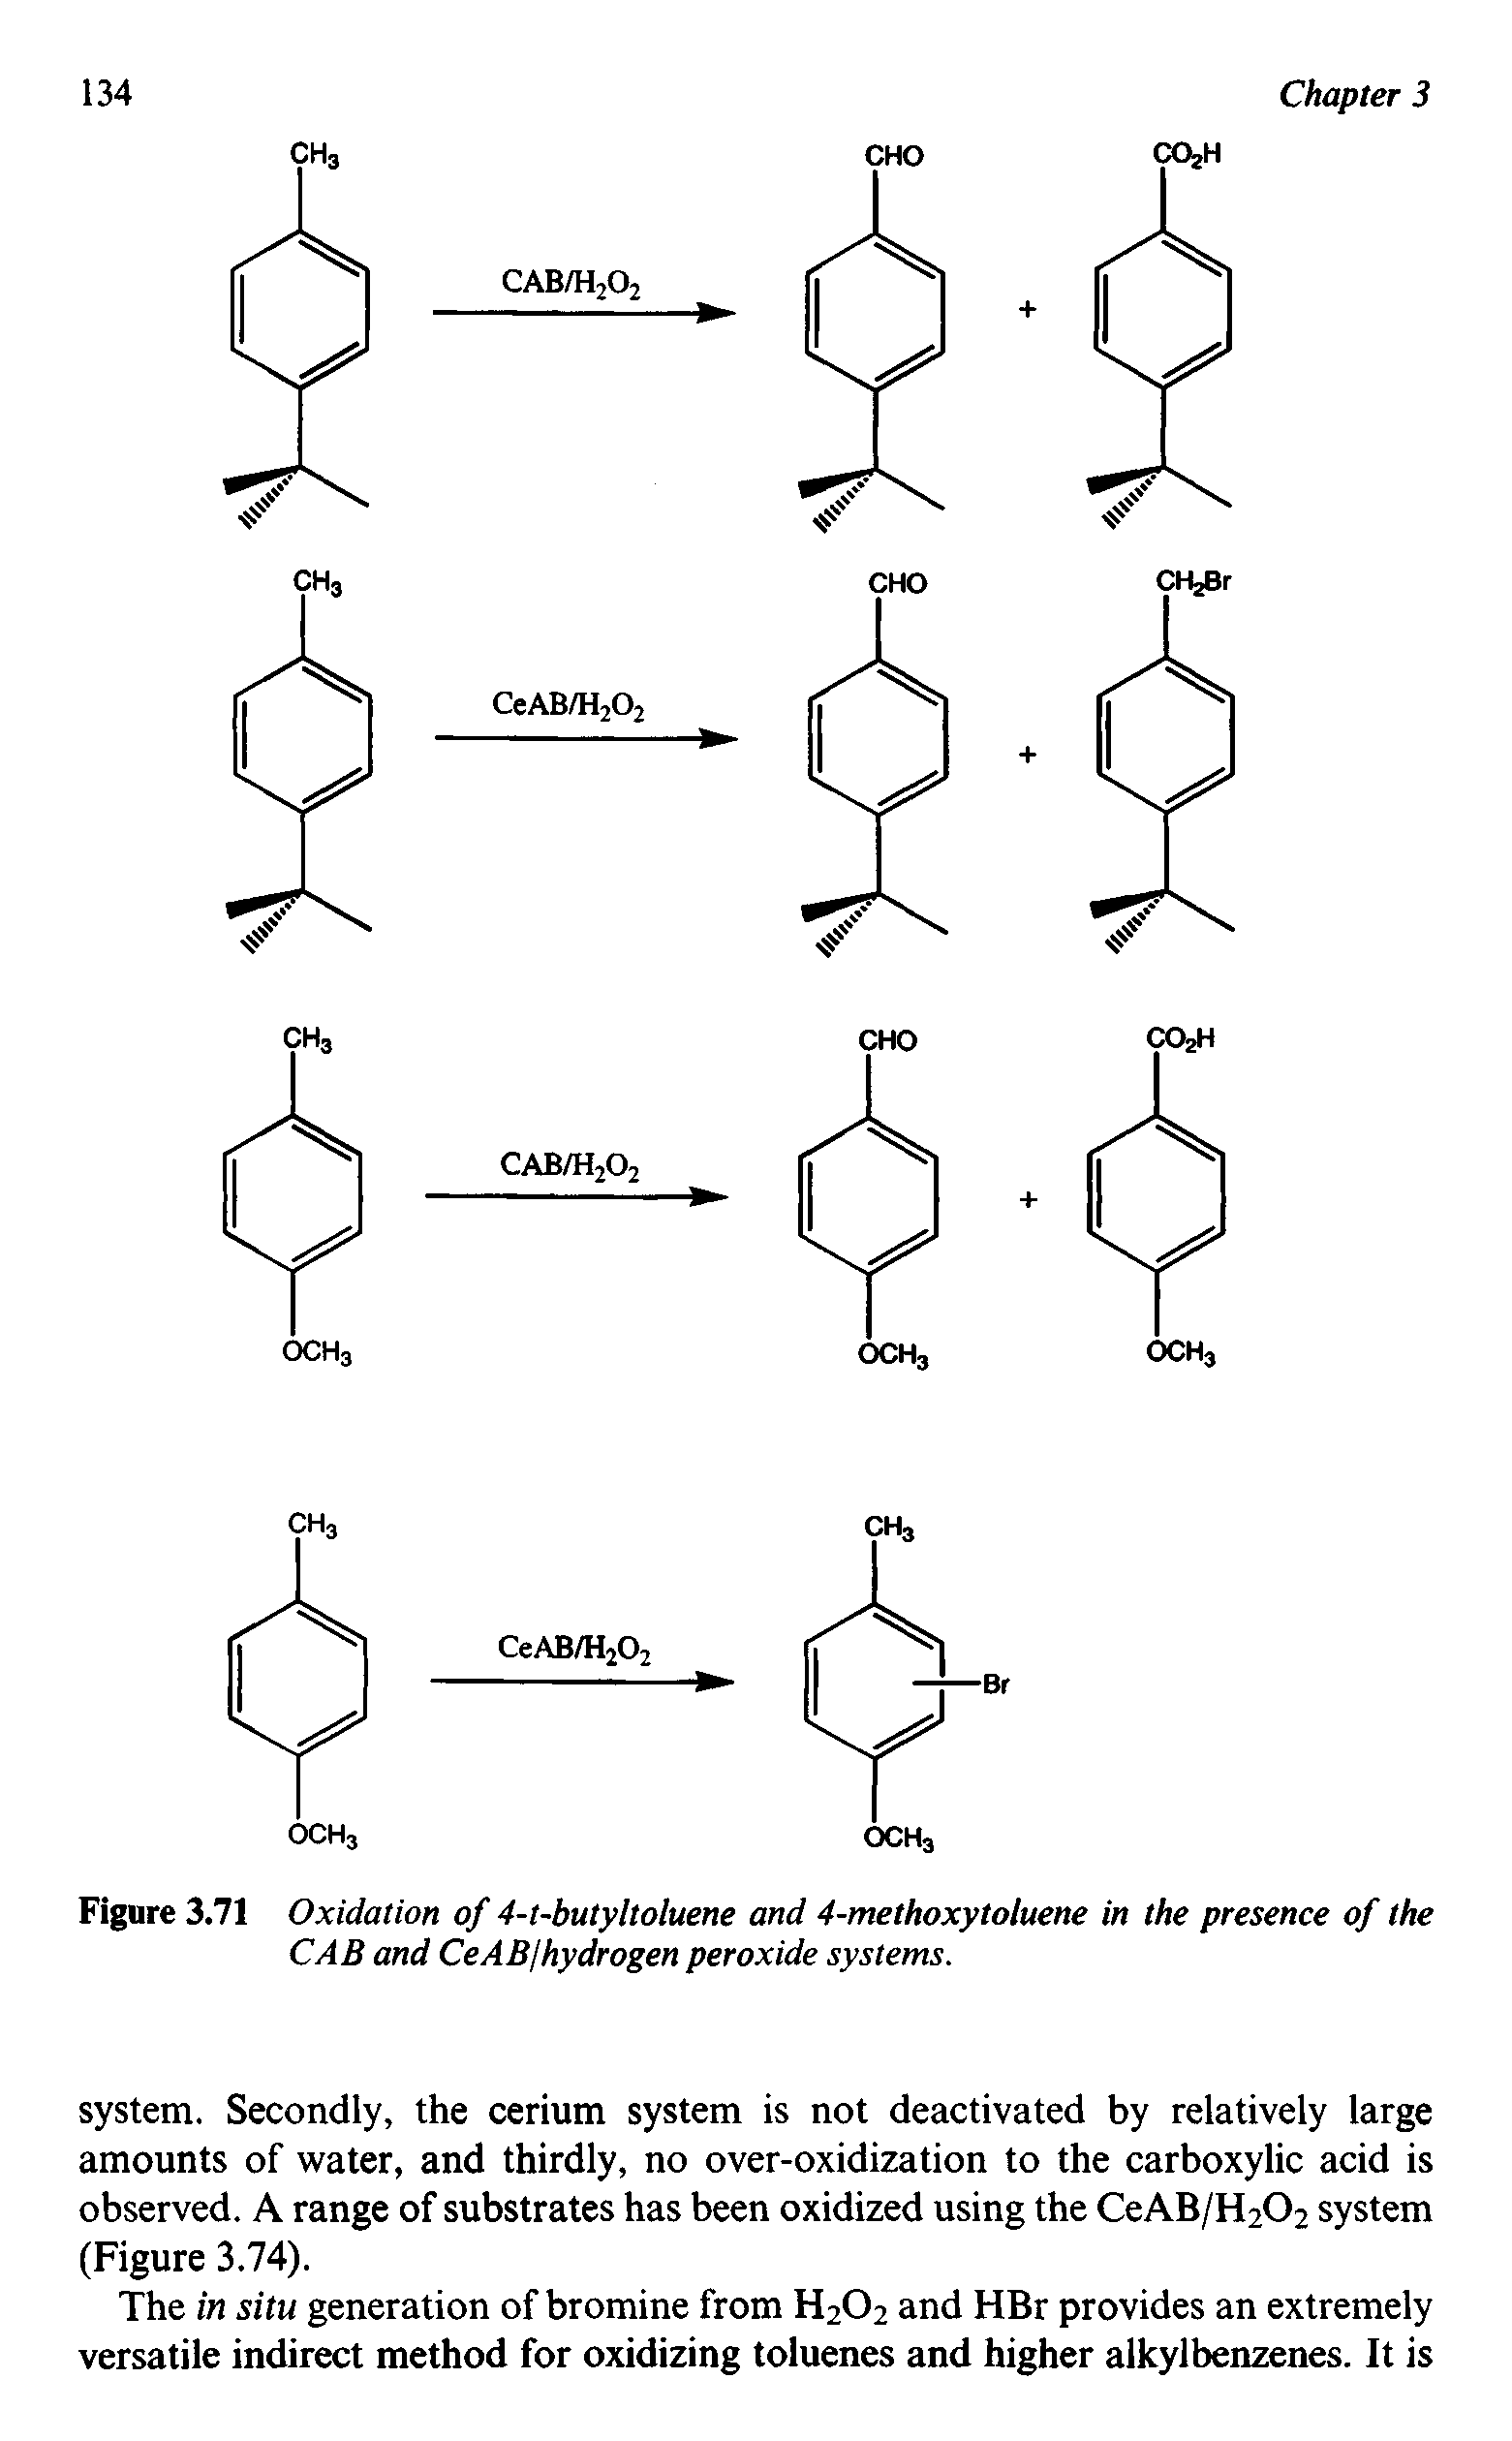 Figure 3.71 Oxidation of 4-t-butyltoluene and 4-methoxytoluene in the presence of the CAB and CeAB/hydrogen peroxide systems.